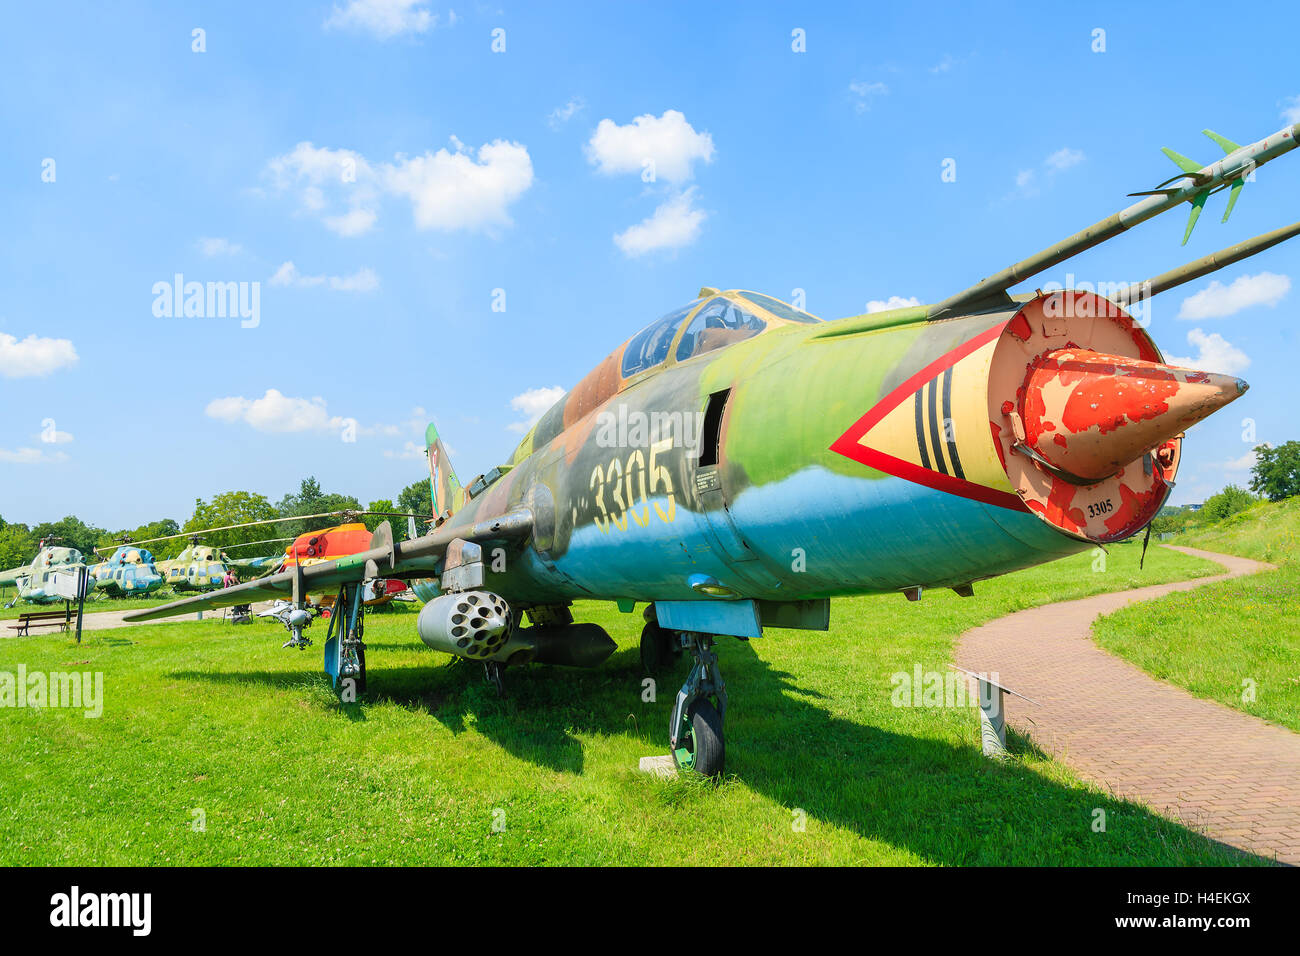 KRAKOW MUSEUM OF AVIATION, POLAND - JUL 27, 2014:  military fighter aircraft on exhibition in outdoor museum of aviation history in Krakow, Poland. In summer often airshows take place here. Stock Photo